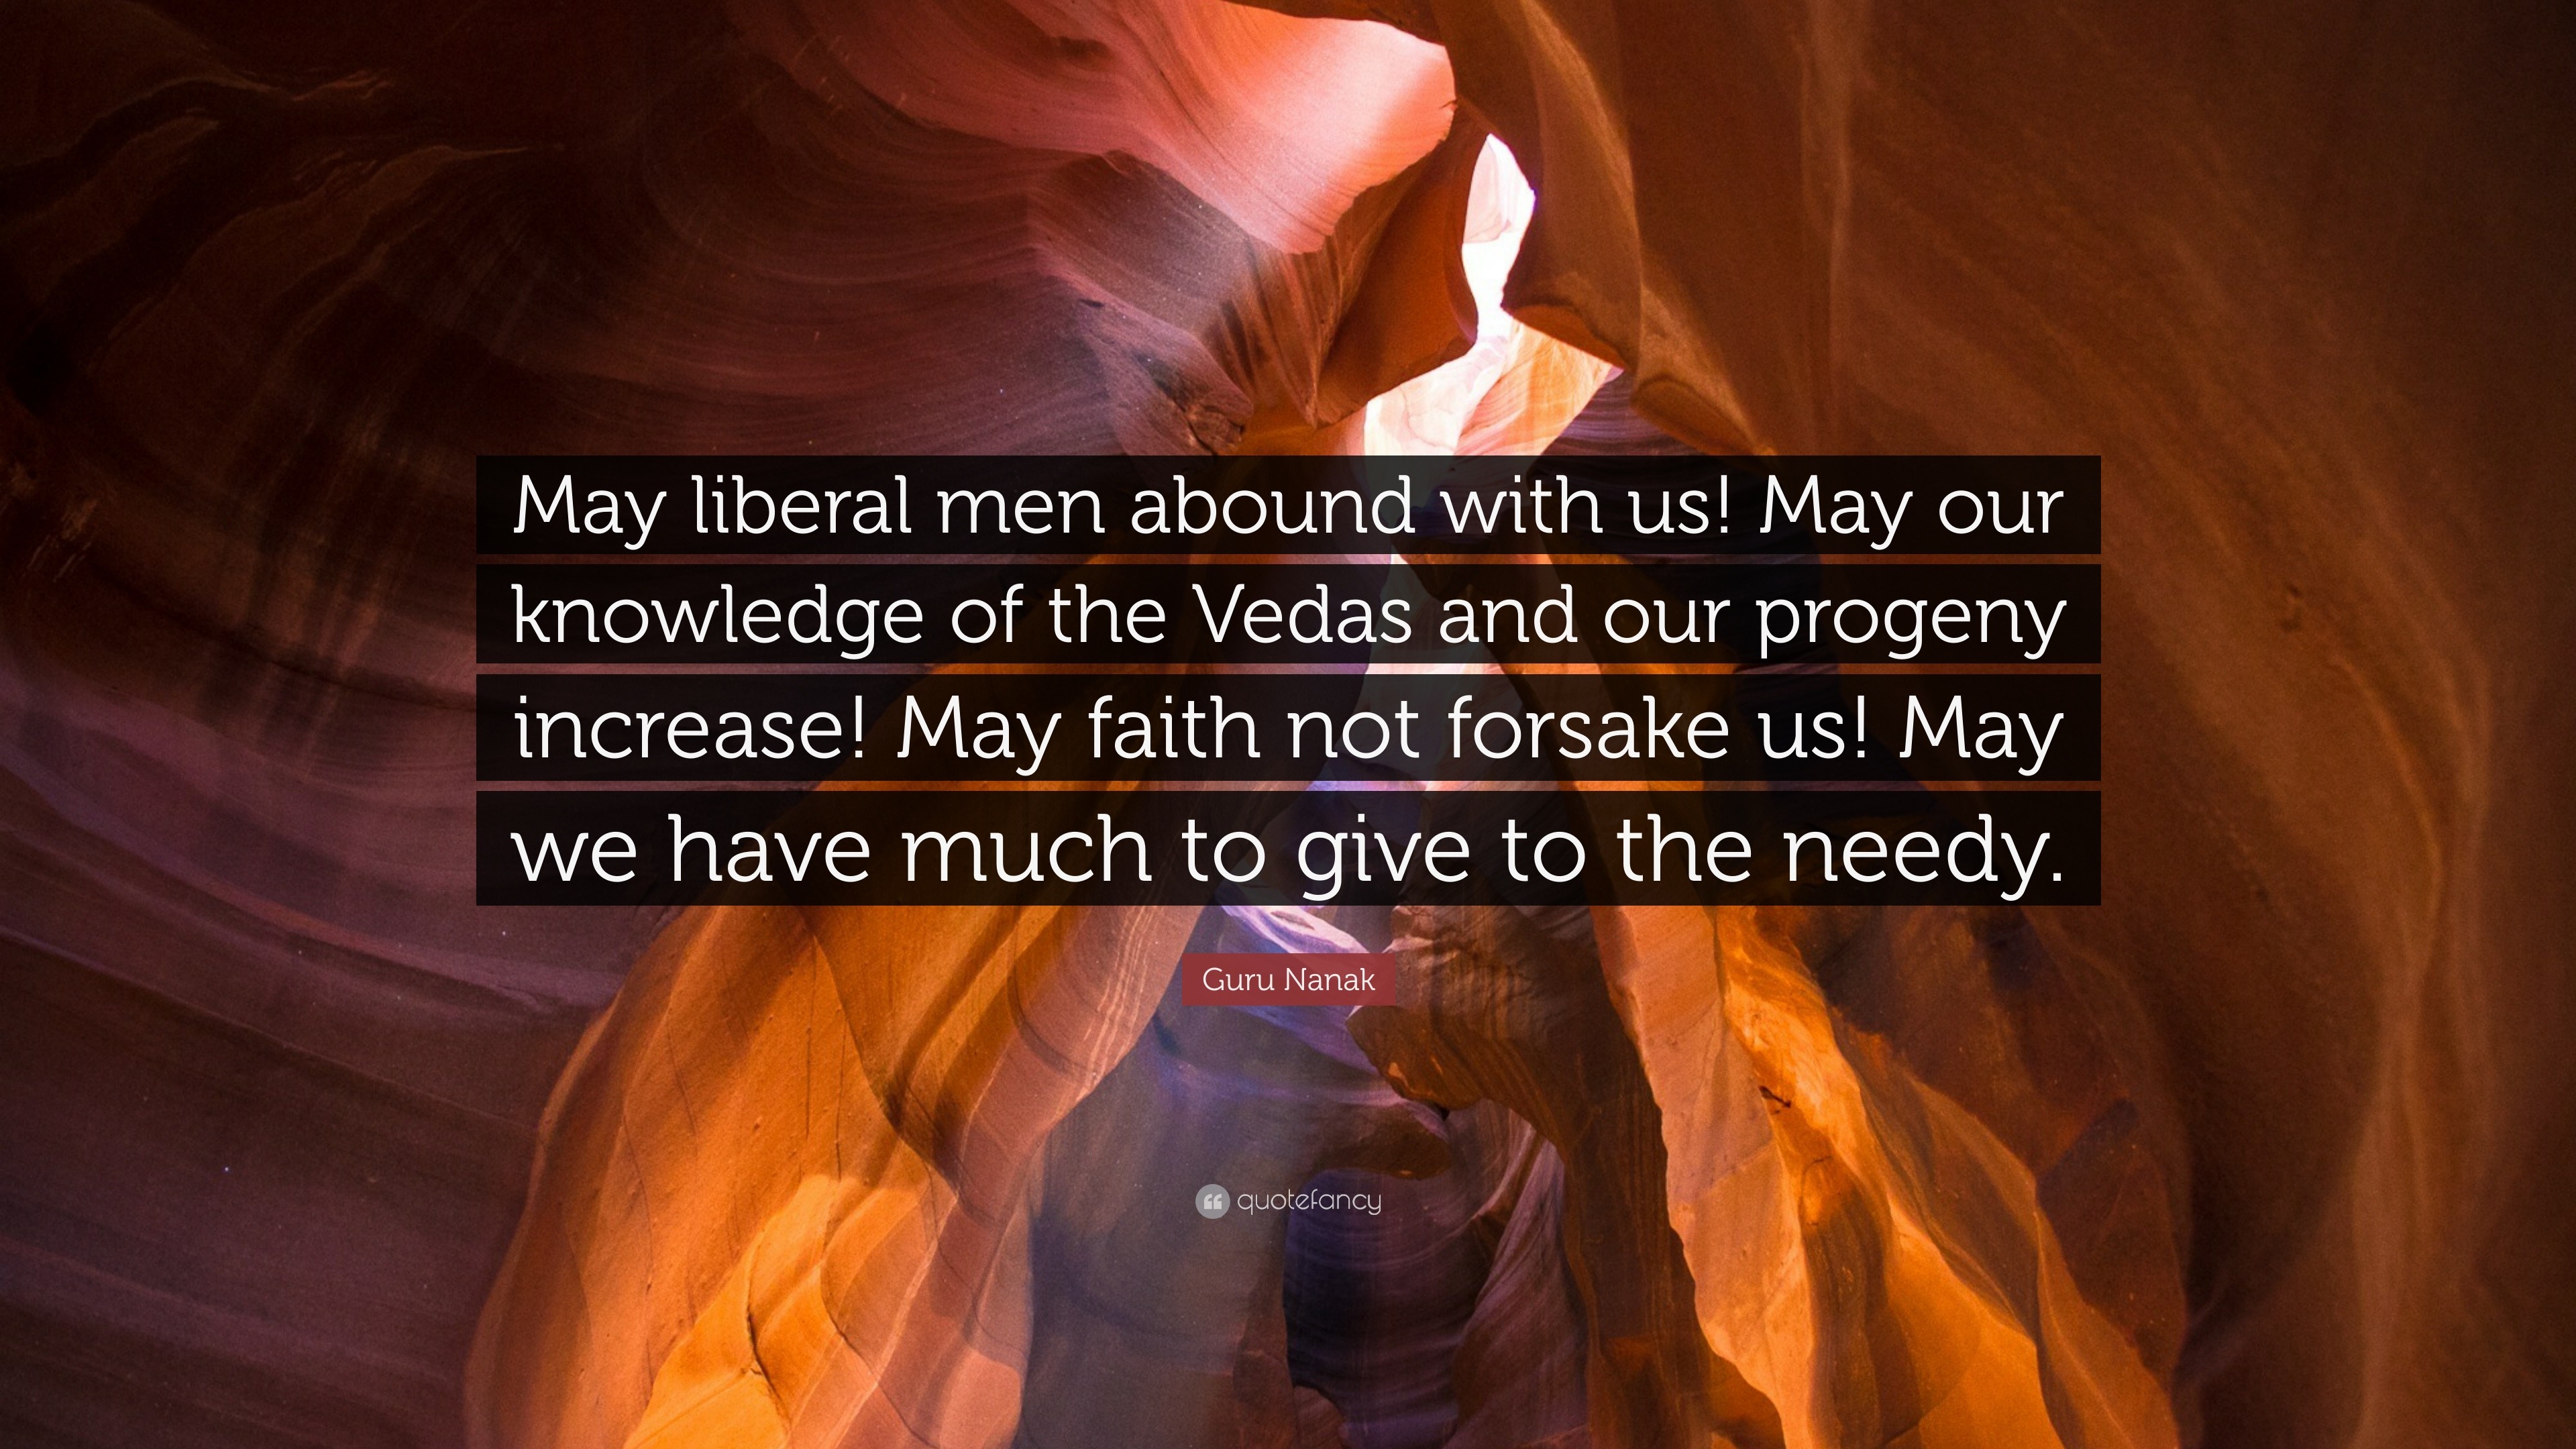 Guru Nanak Quote: “May liberal men abound with us! May our knowledge of